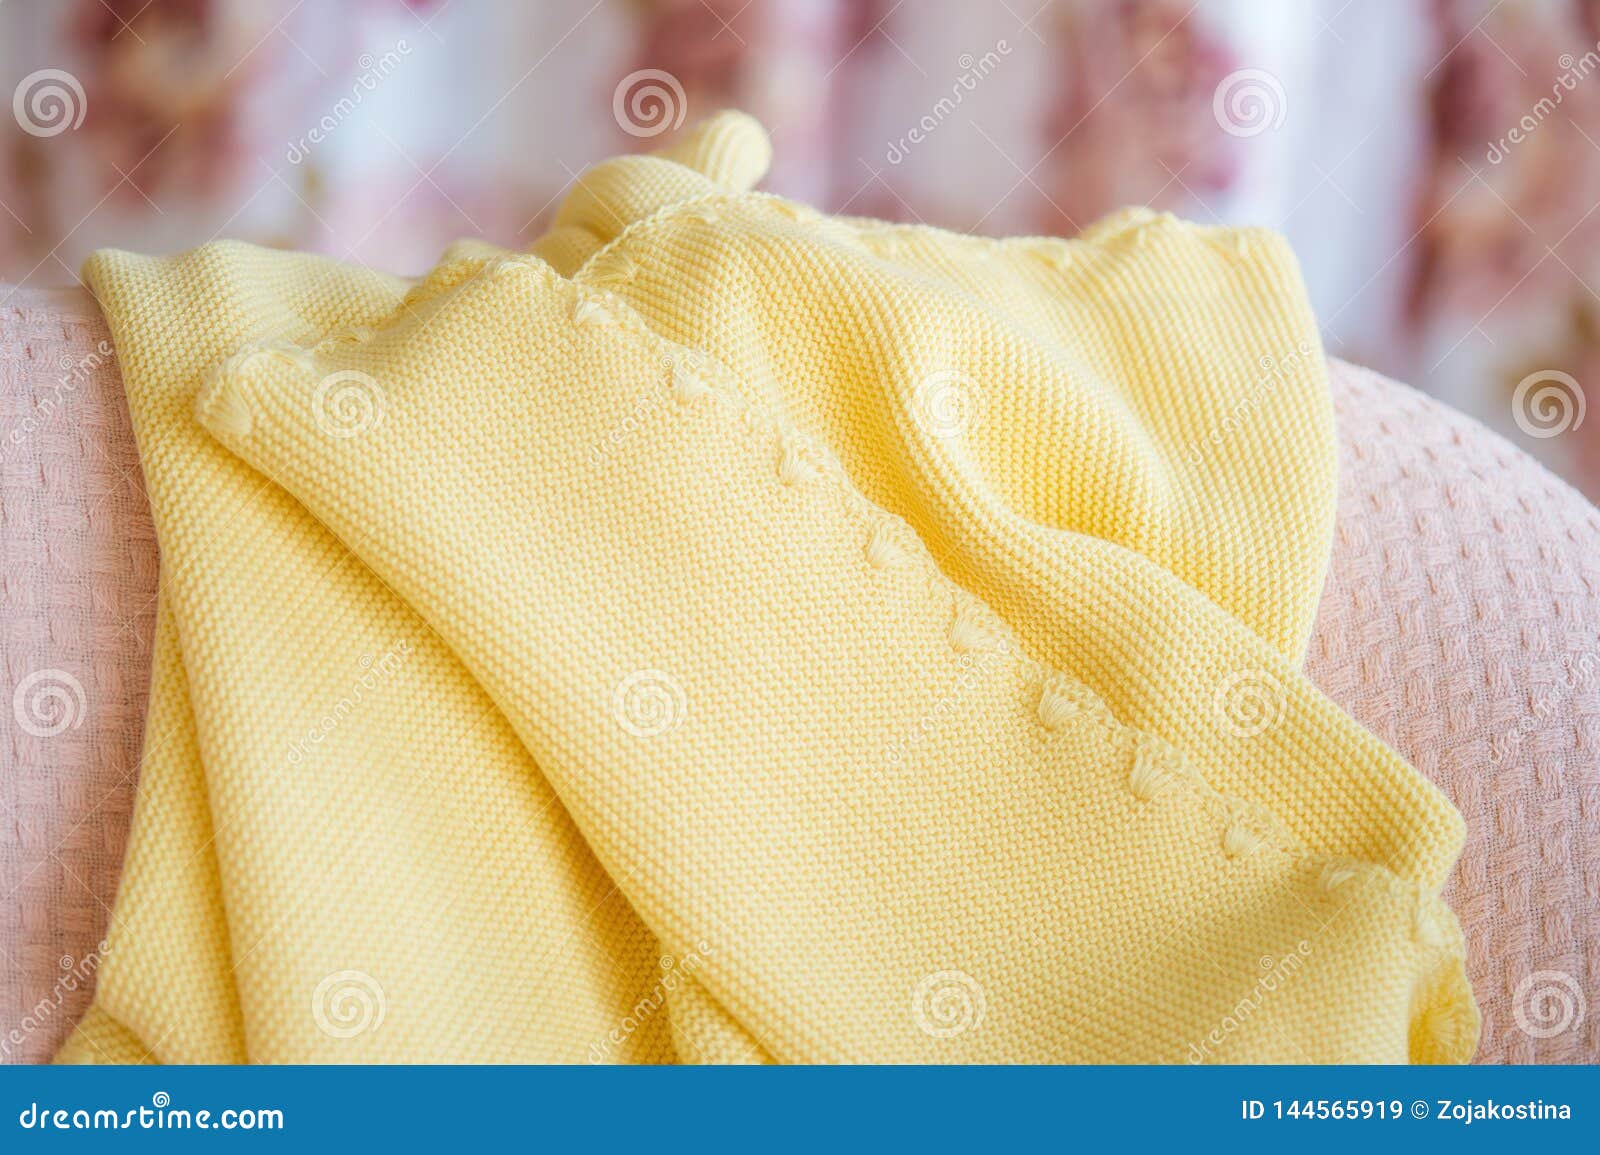 yellow knitted plaid trimmed with lace i